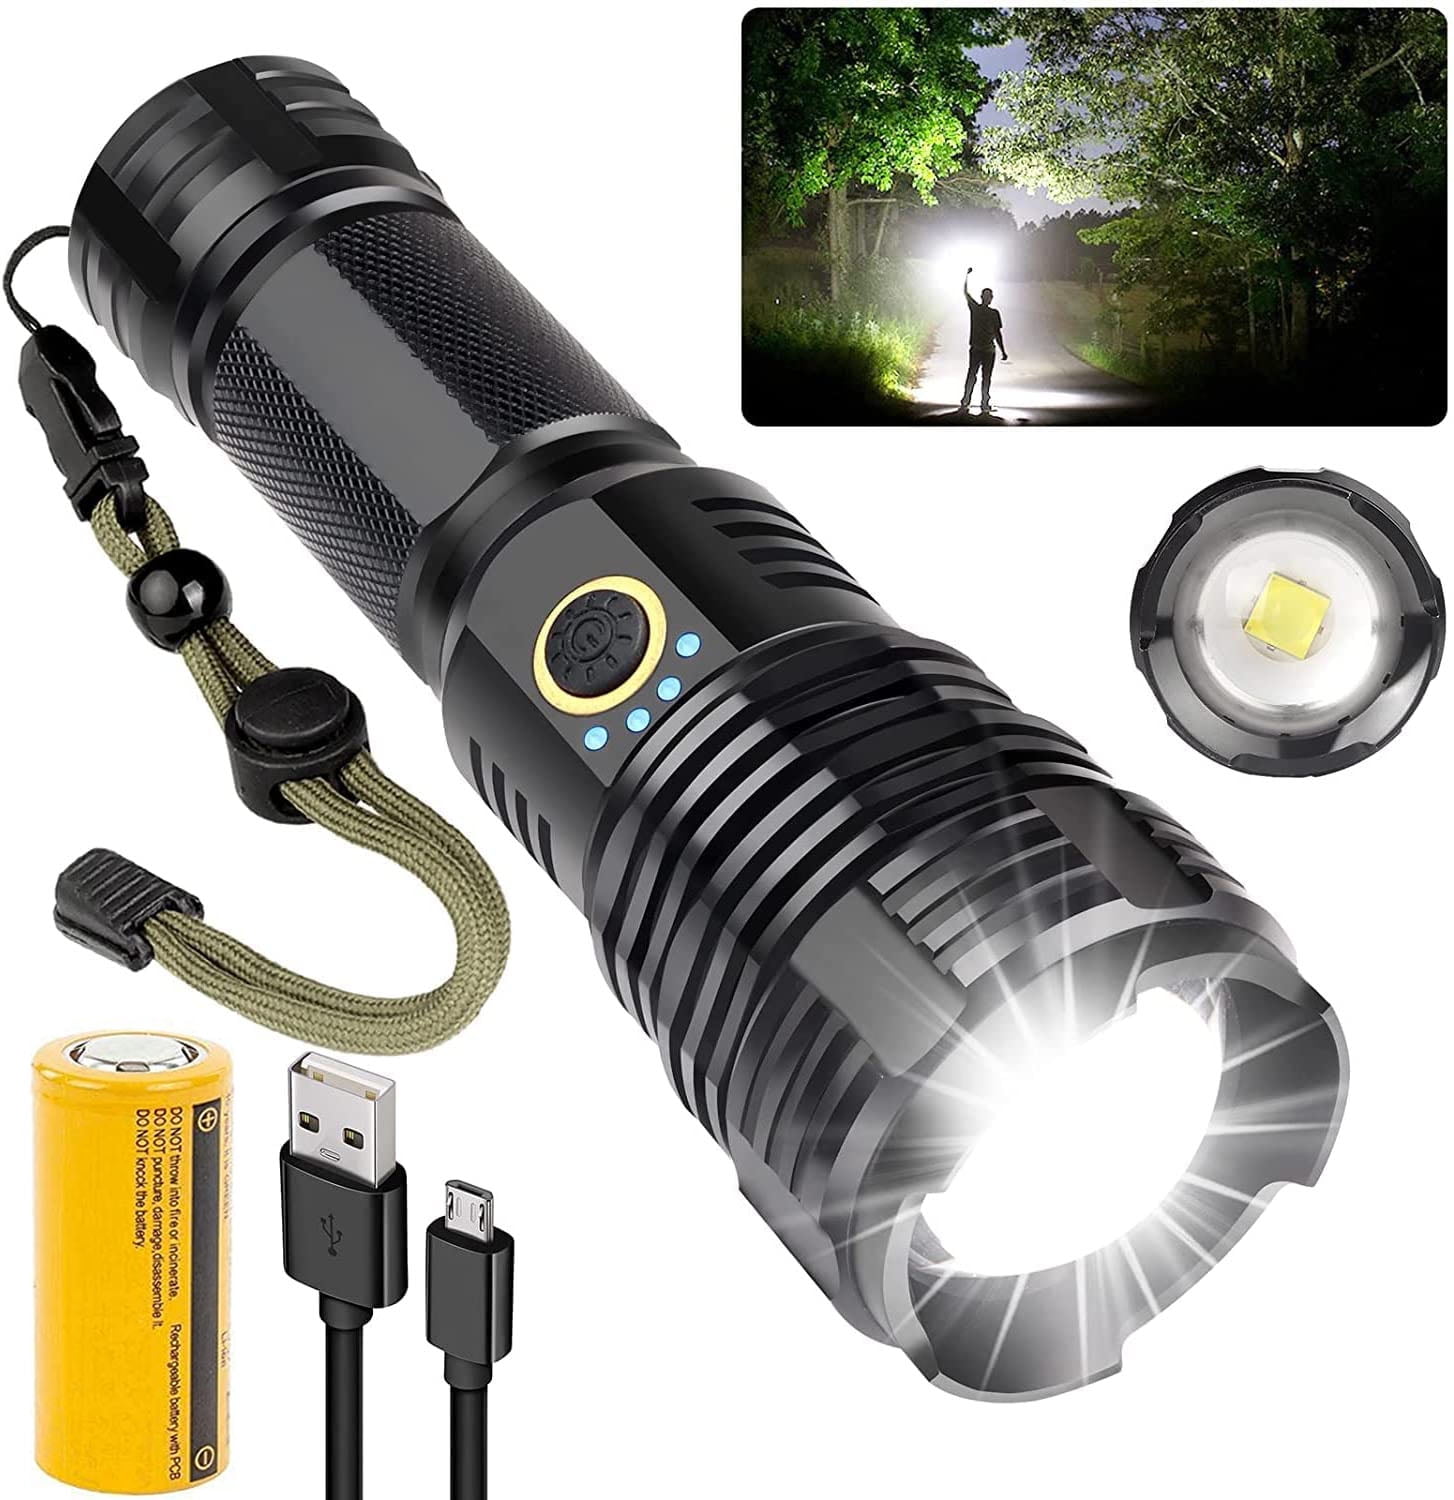 Rechargeable Flashlights High Lumens, 900,000 Lumens Led Tactical Handheld  Flashlight Battery Powered with 7 Light Modes, COB Side Light, USB C